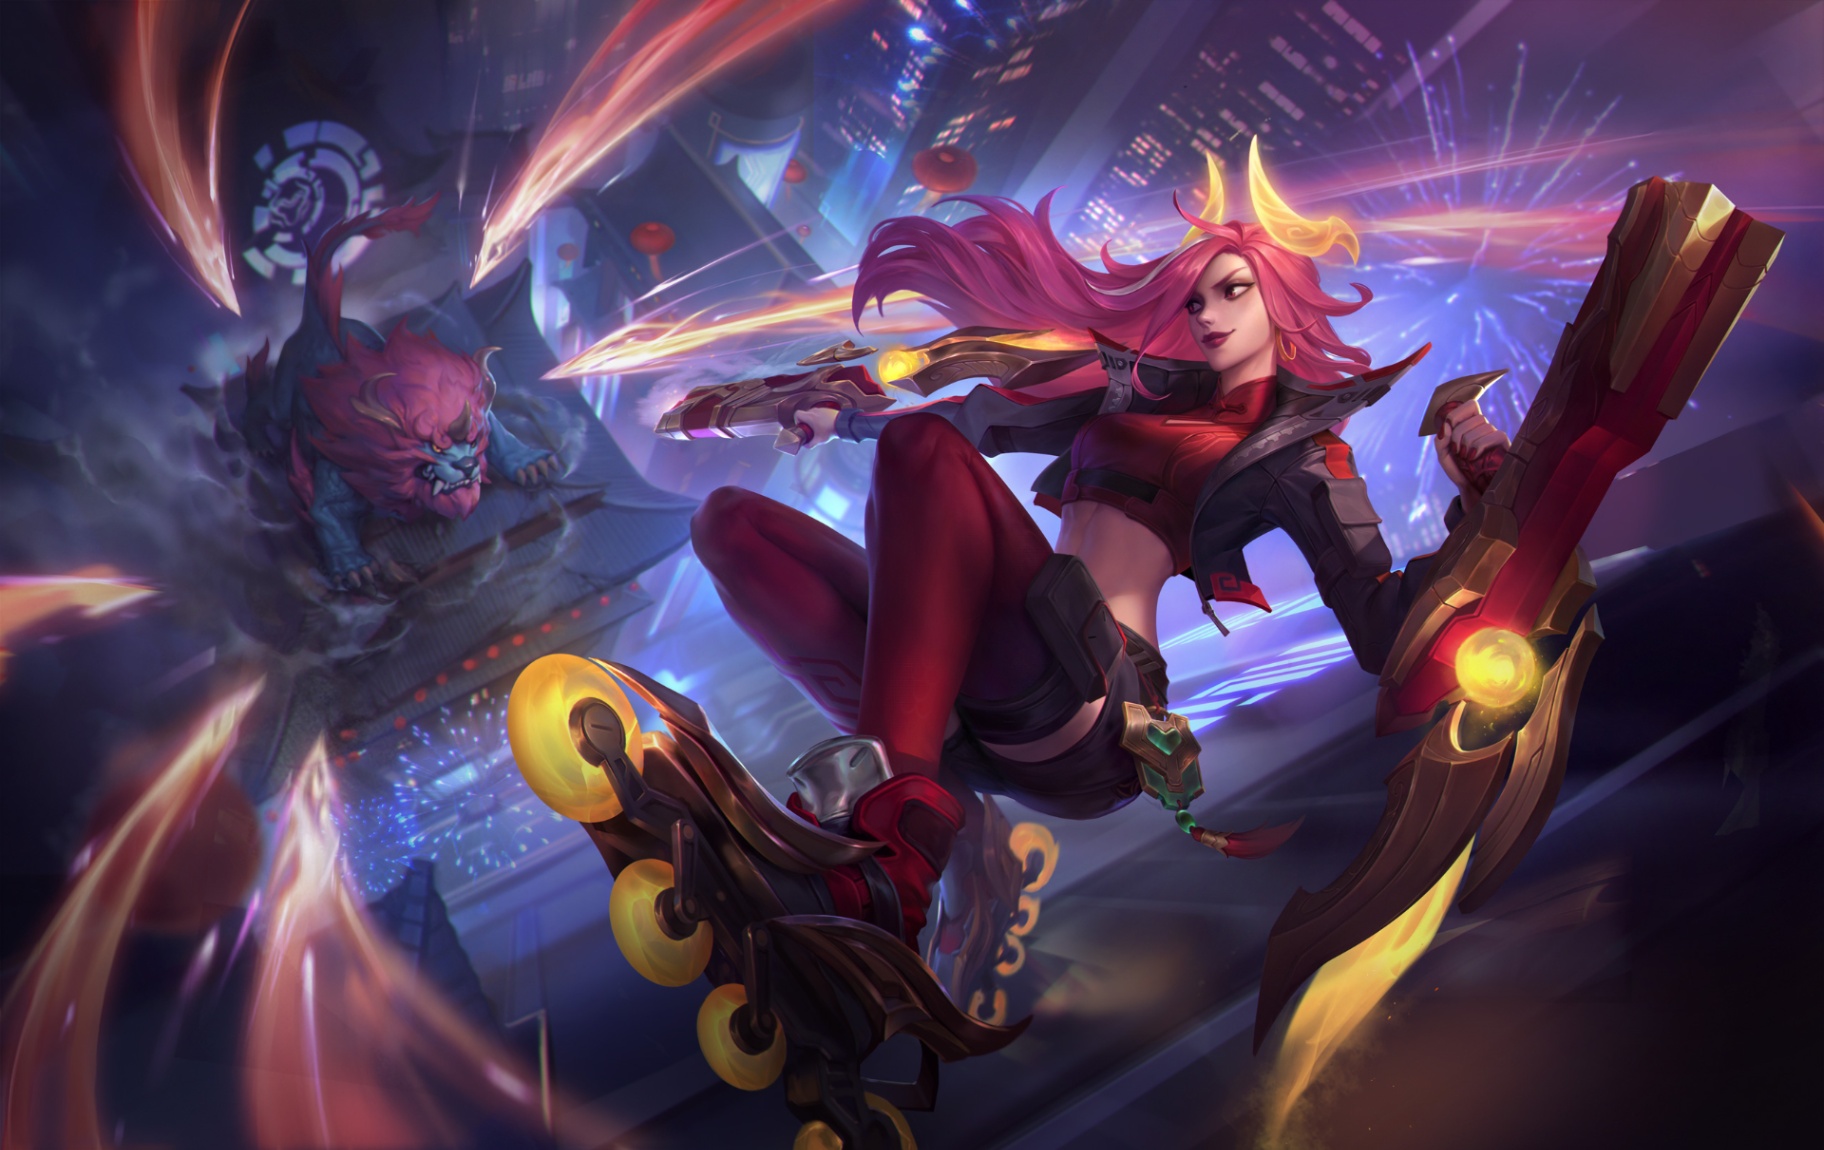 How to Get Skins on League of Legends: Wild Rift